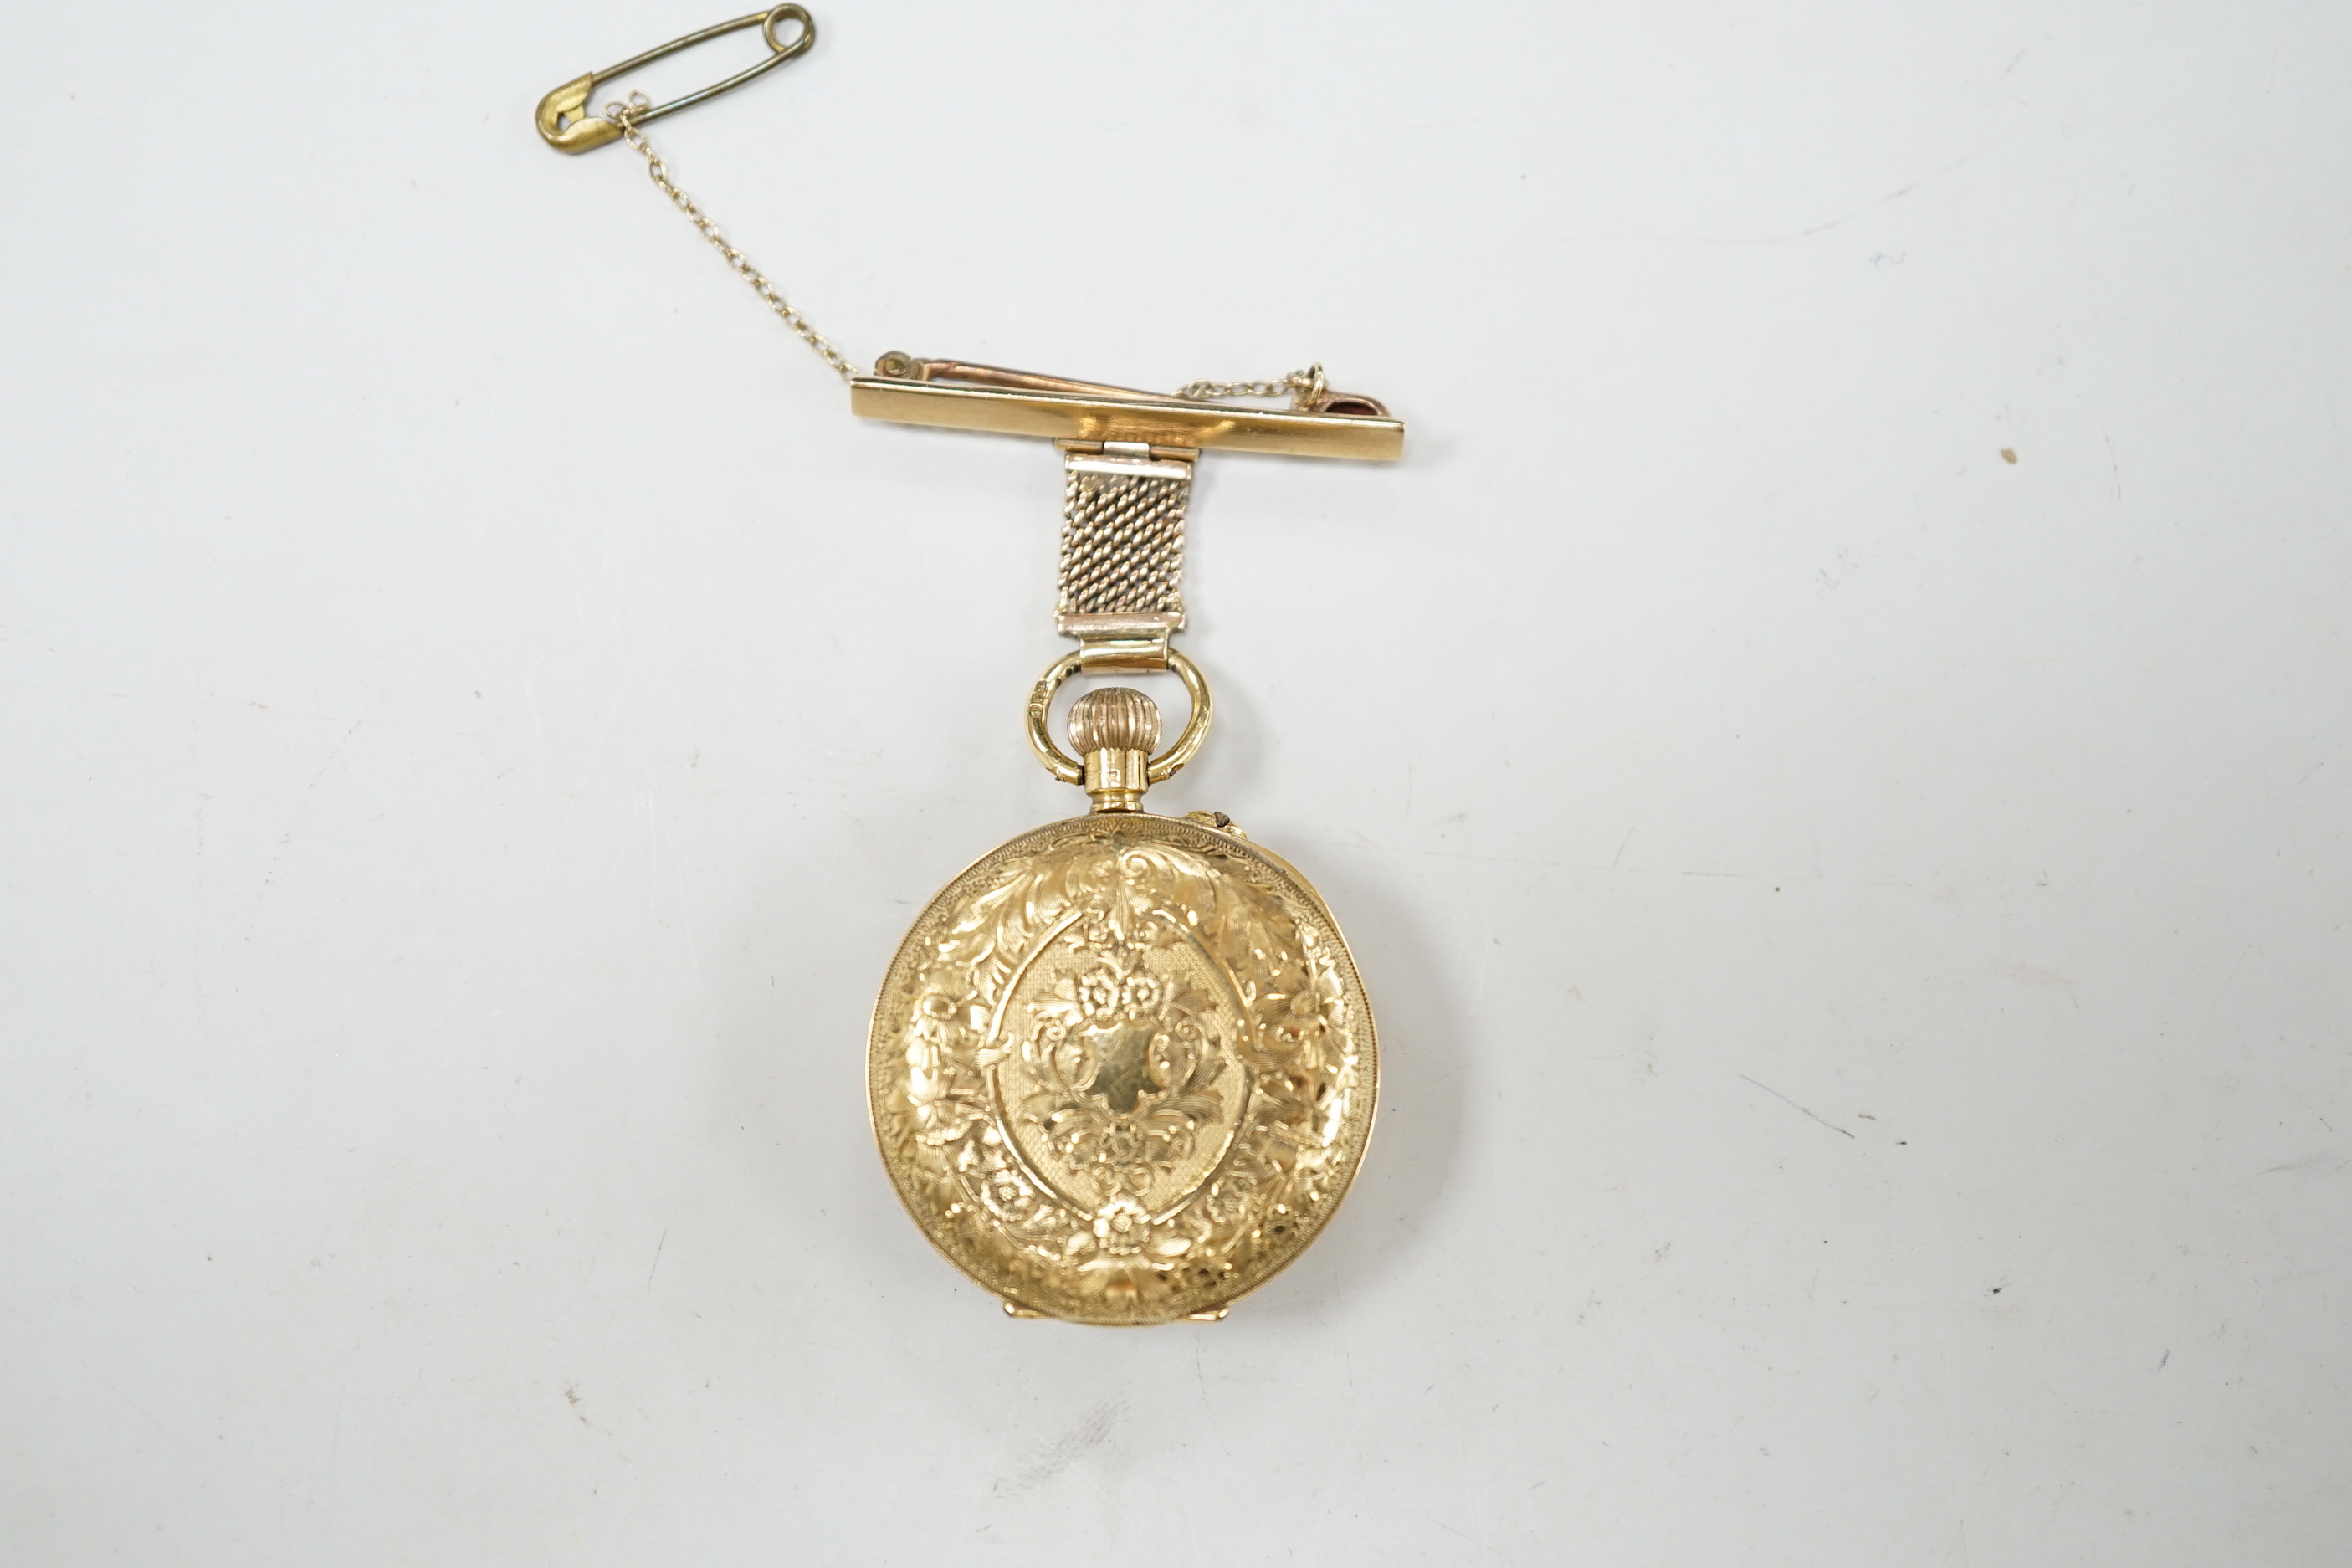 An early 20th century 18ct gold open face fob watch, with Roman dial, on a 9ct suspension brooch, gross weight 27.5 grams.